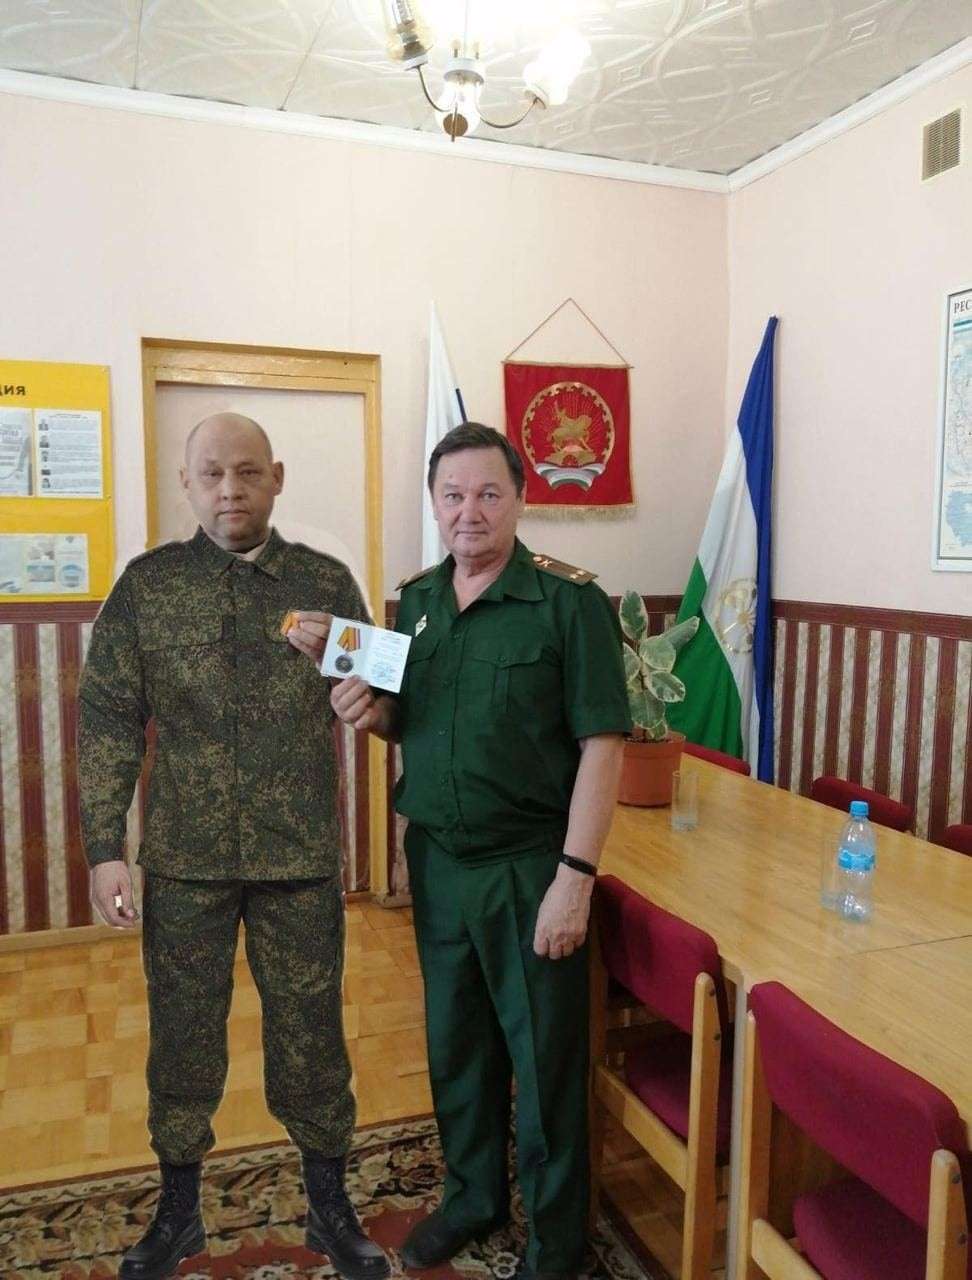 image for Russian Officials Explain 'Photoshopping' Dead Soldier Into Awards Photo